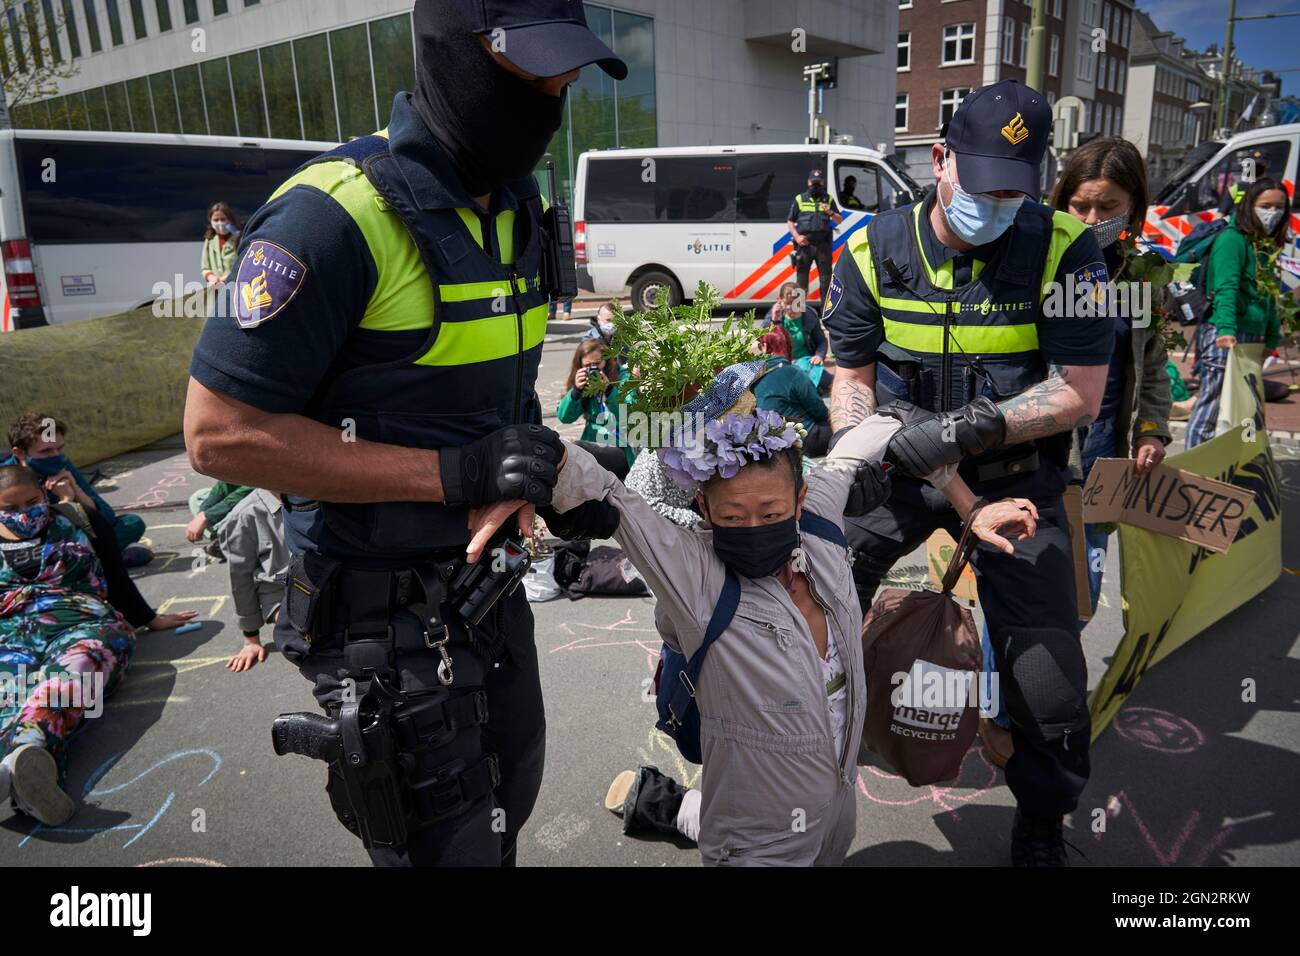 NGO activist, participant in climate change protest, arrested by police Stock Photo